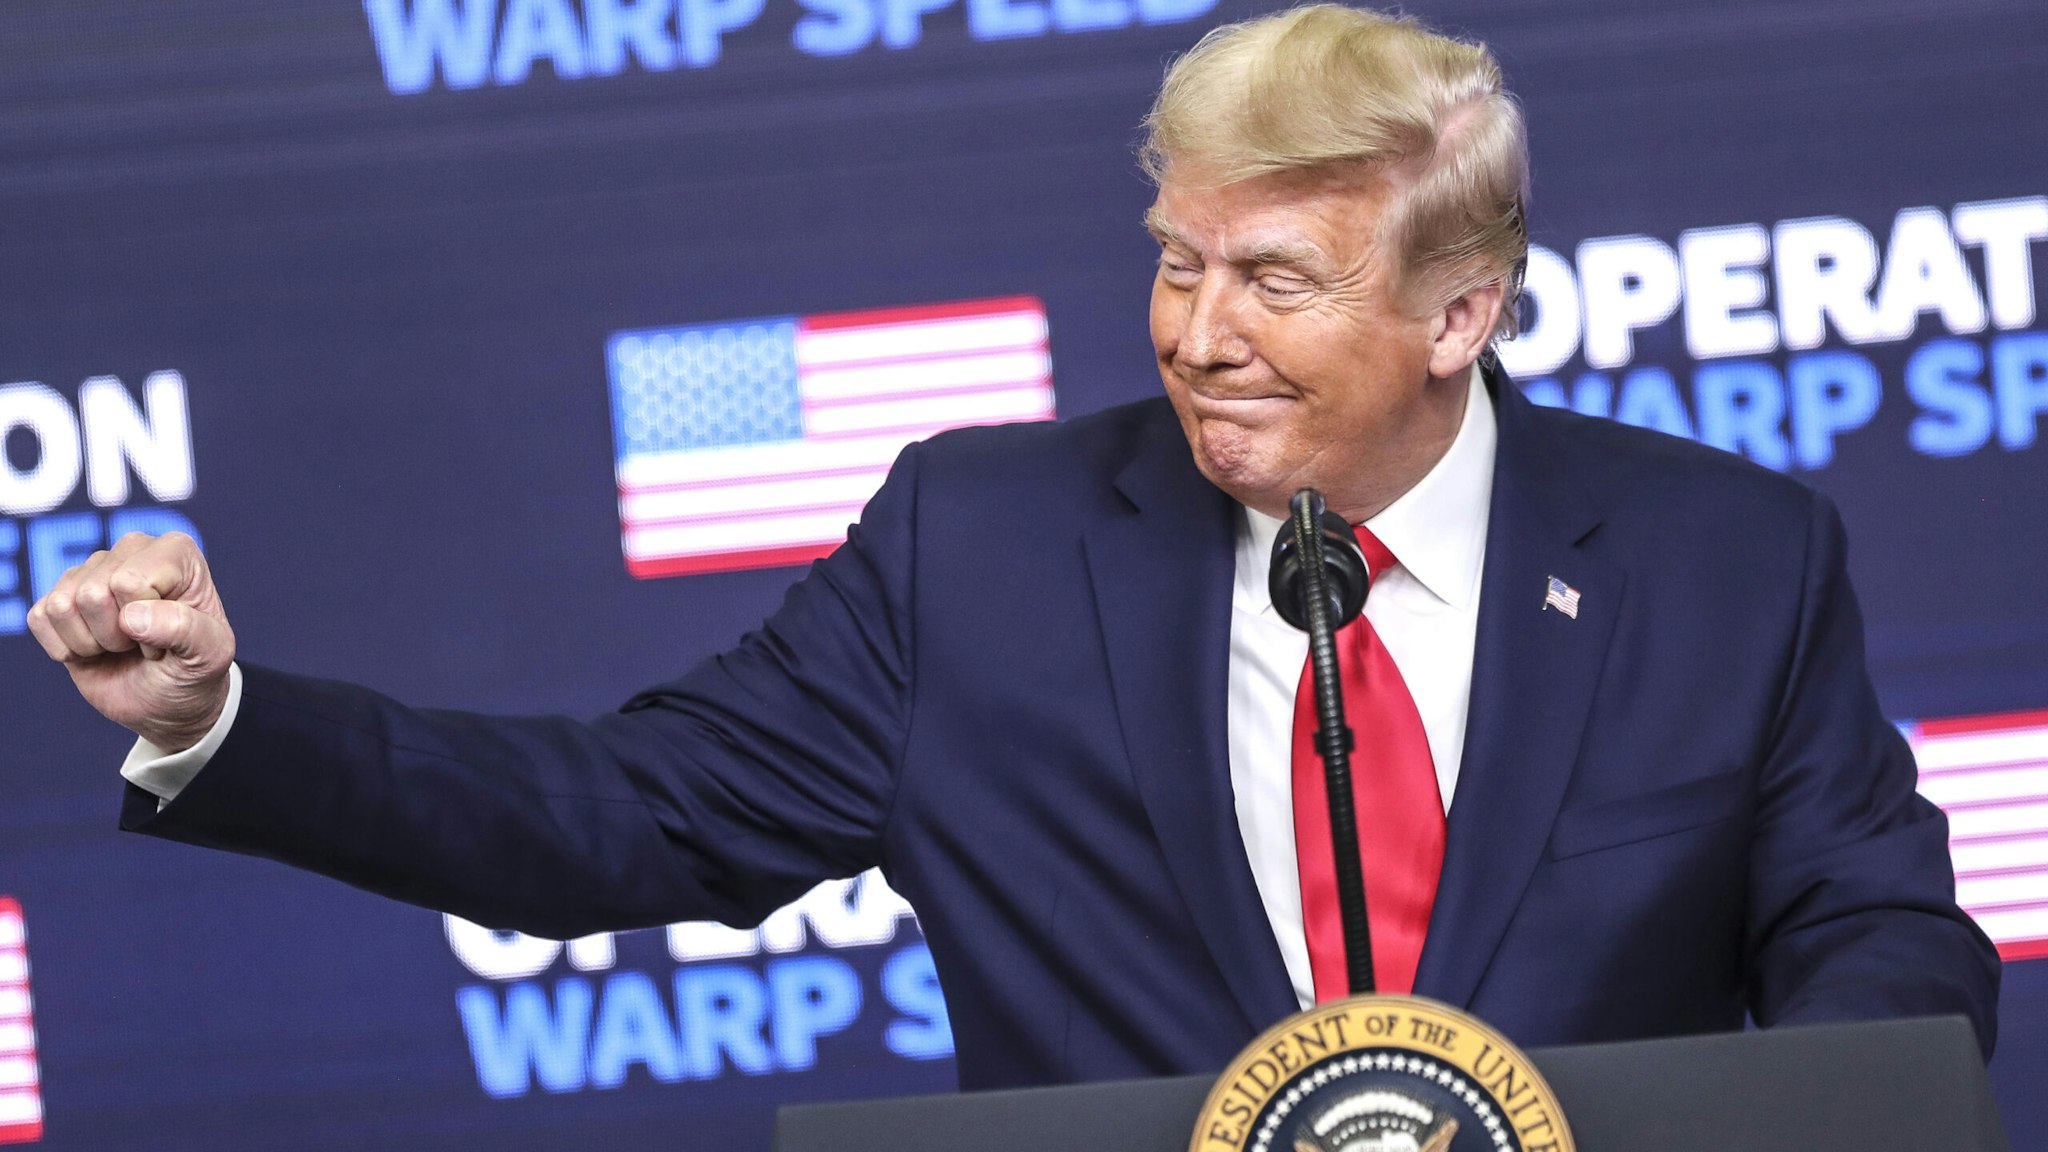 U.S. President Donald Trump gestures during an Operation Warp Speed vaccine summit at the White House in Washington, D.C., U.S., on Tuesday, Dec. 8, 2020. Trump celebrated the development of coronavirus vaccines at a White House summit on Tuesday and vowed to use executive powers if necessary to acquire sufficient doses, as the number of U.S. cases surpassed 15 million.